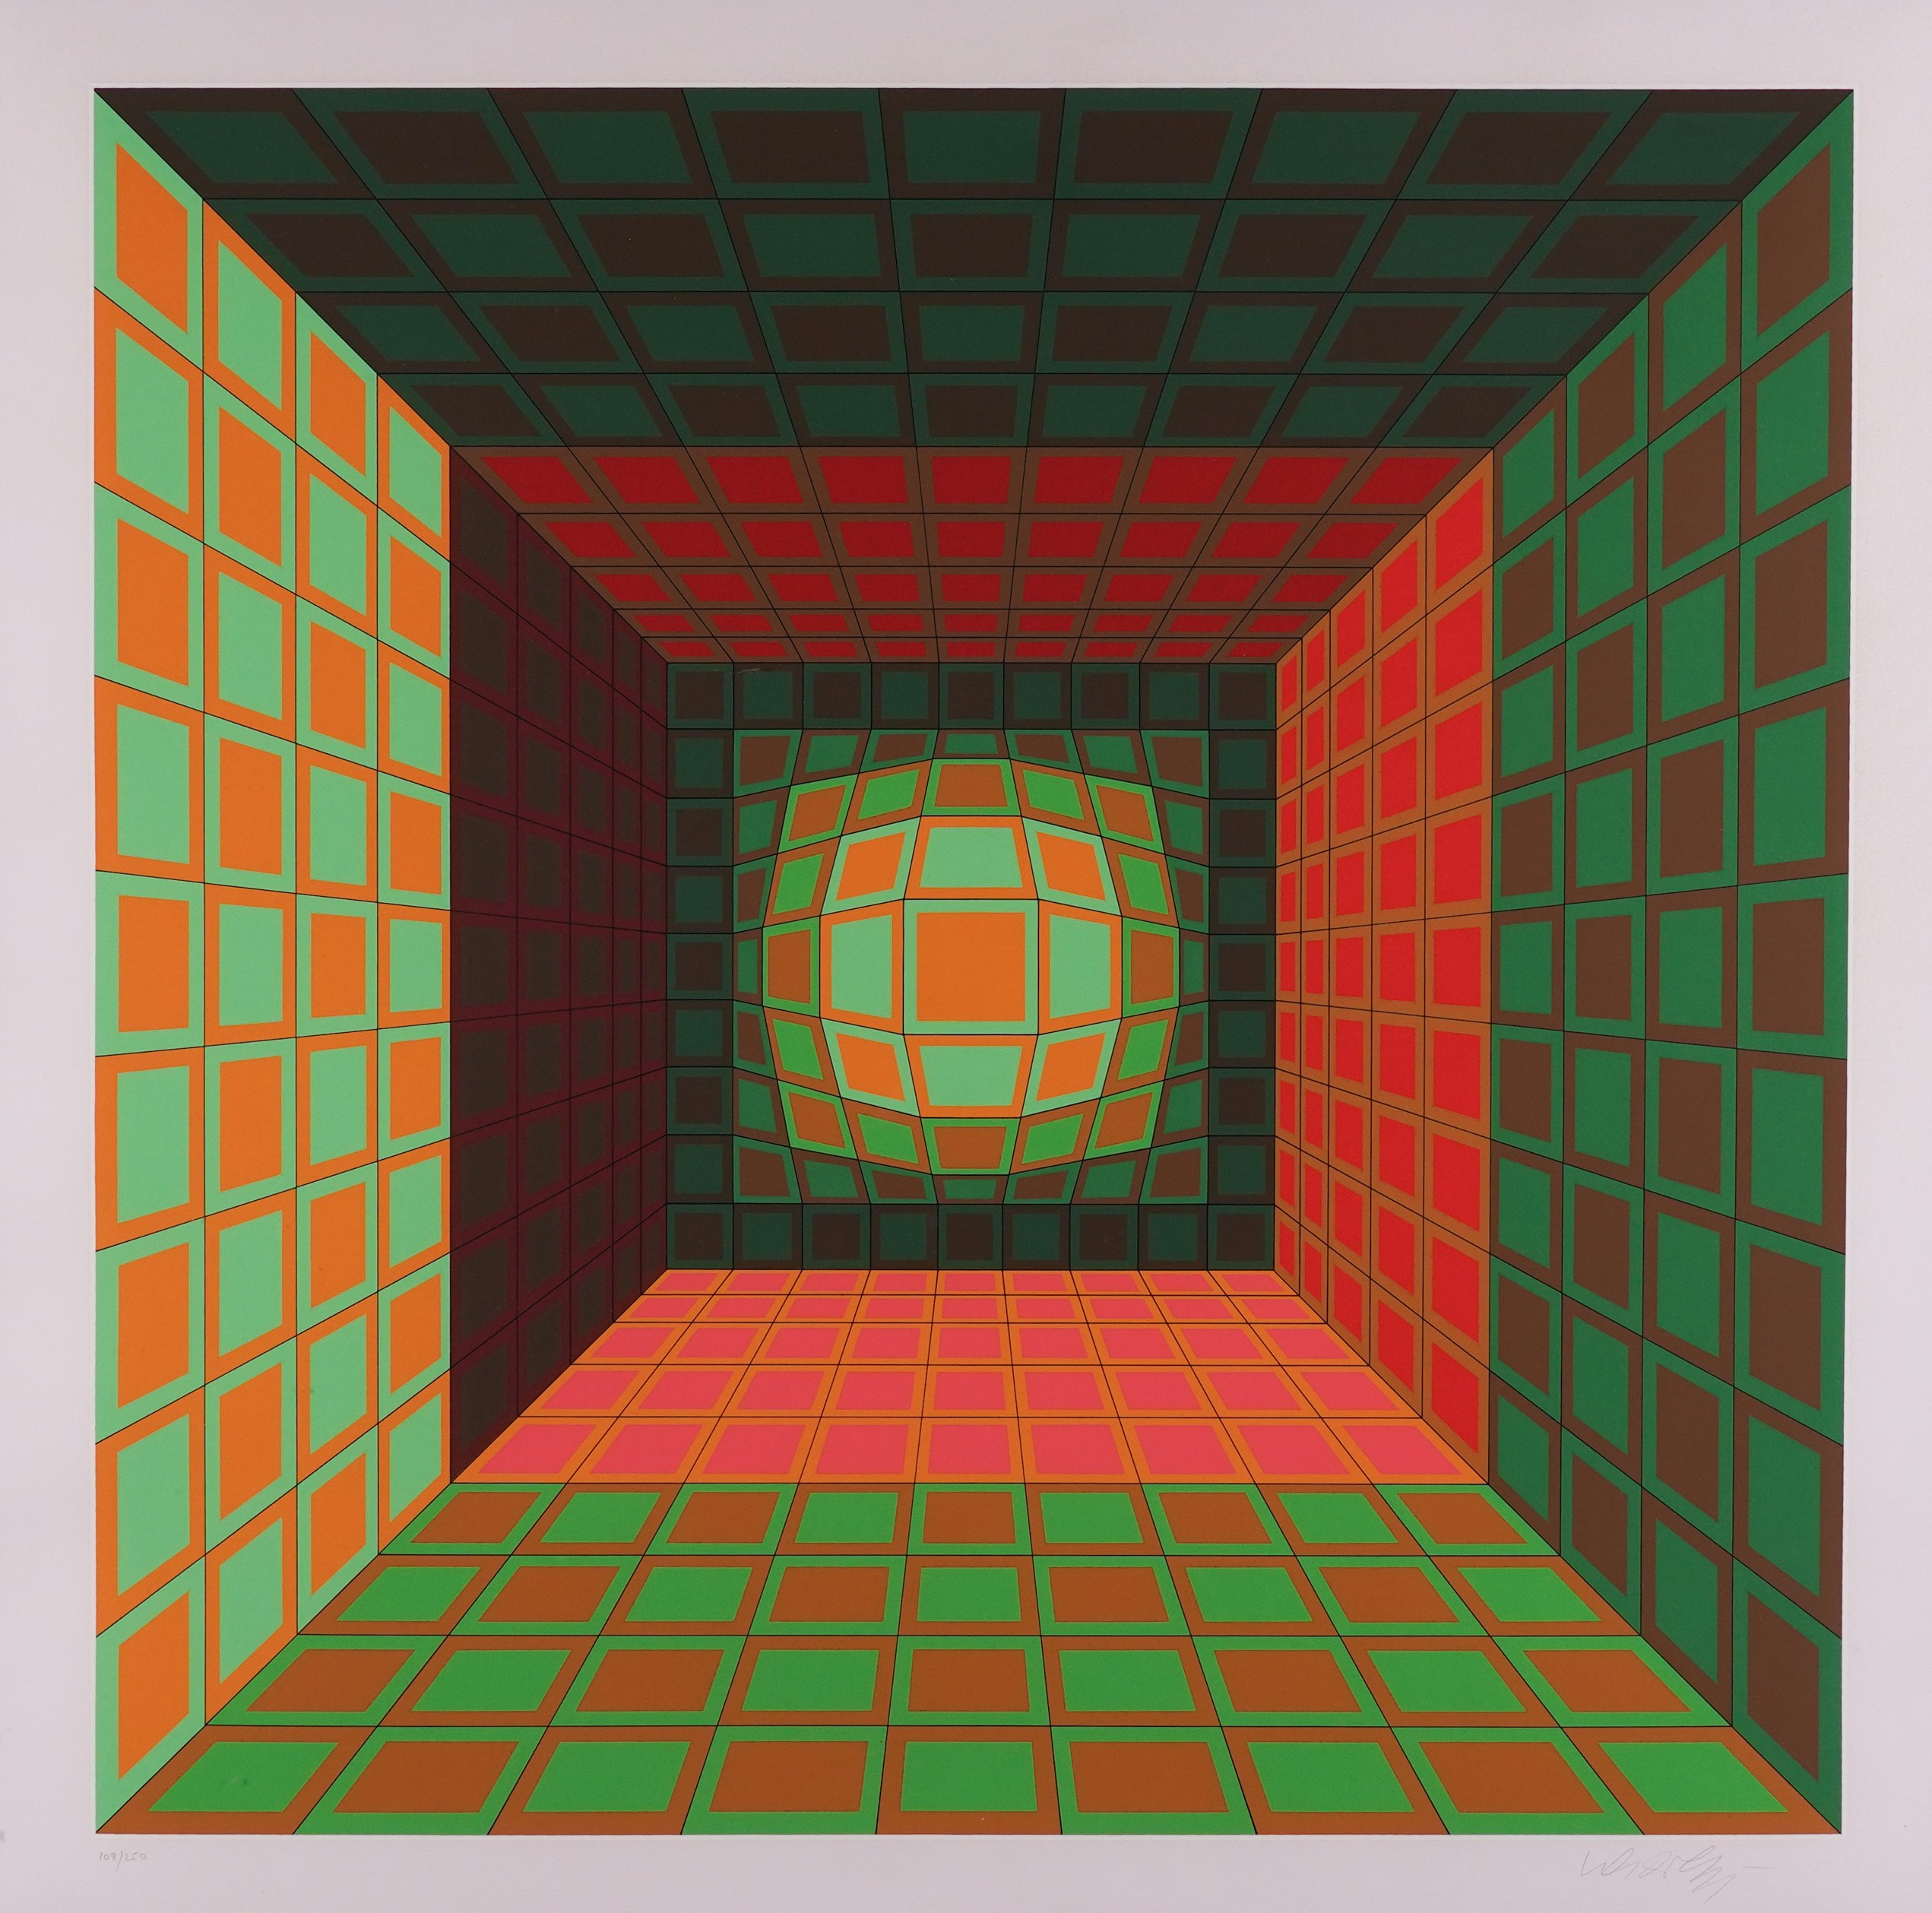 VICTOR VASARELY (HUNGARIAN/FRENCH, 1906-1997)